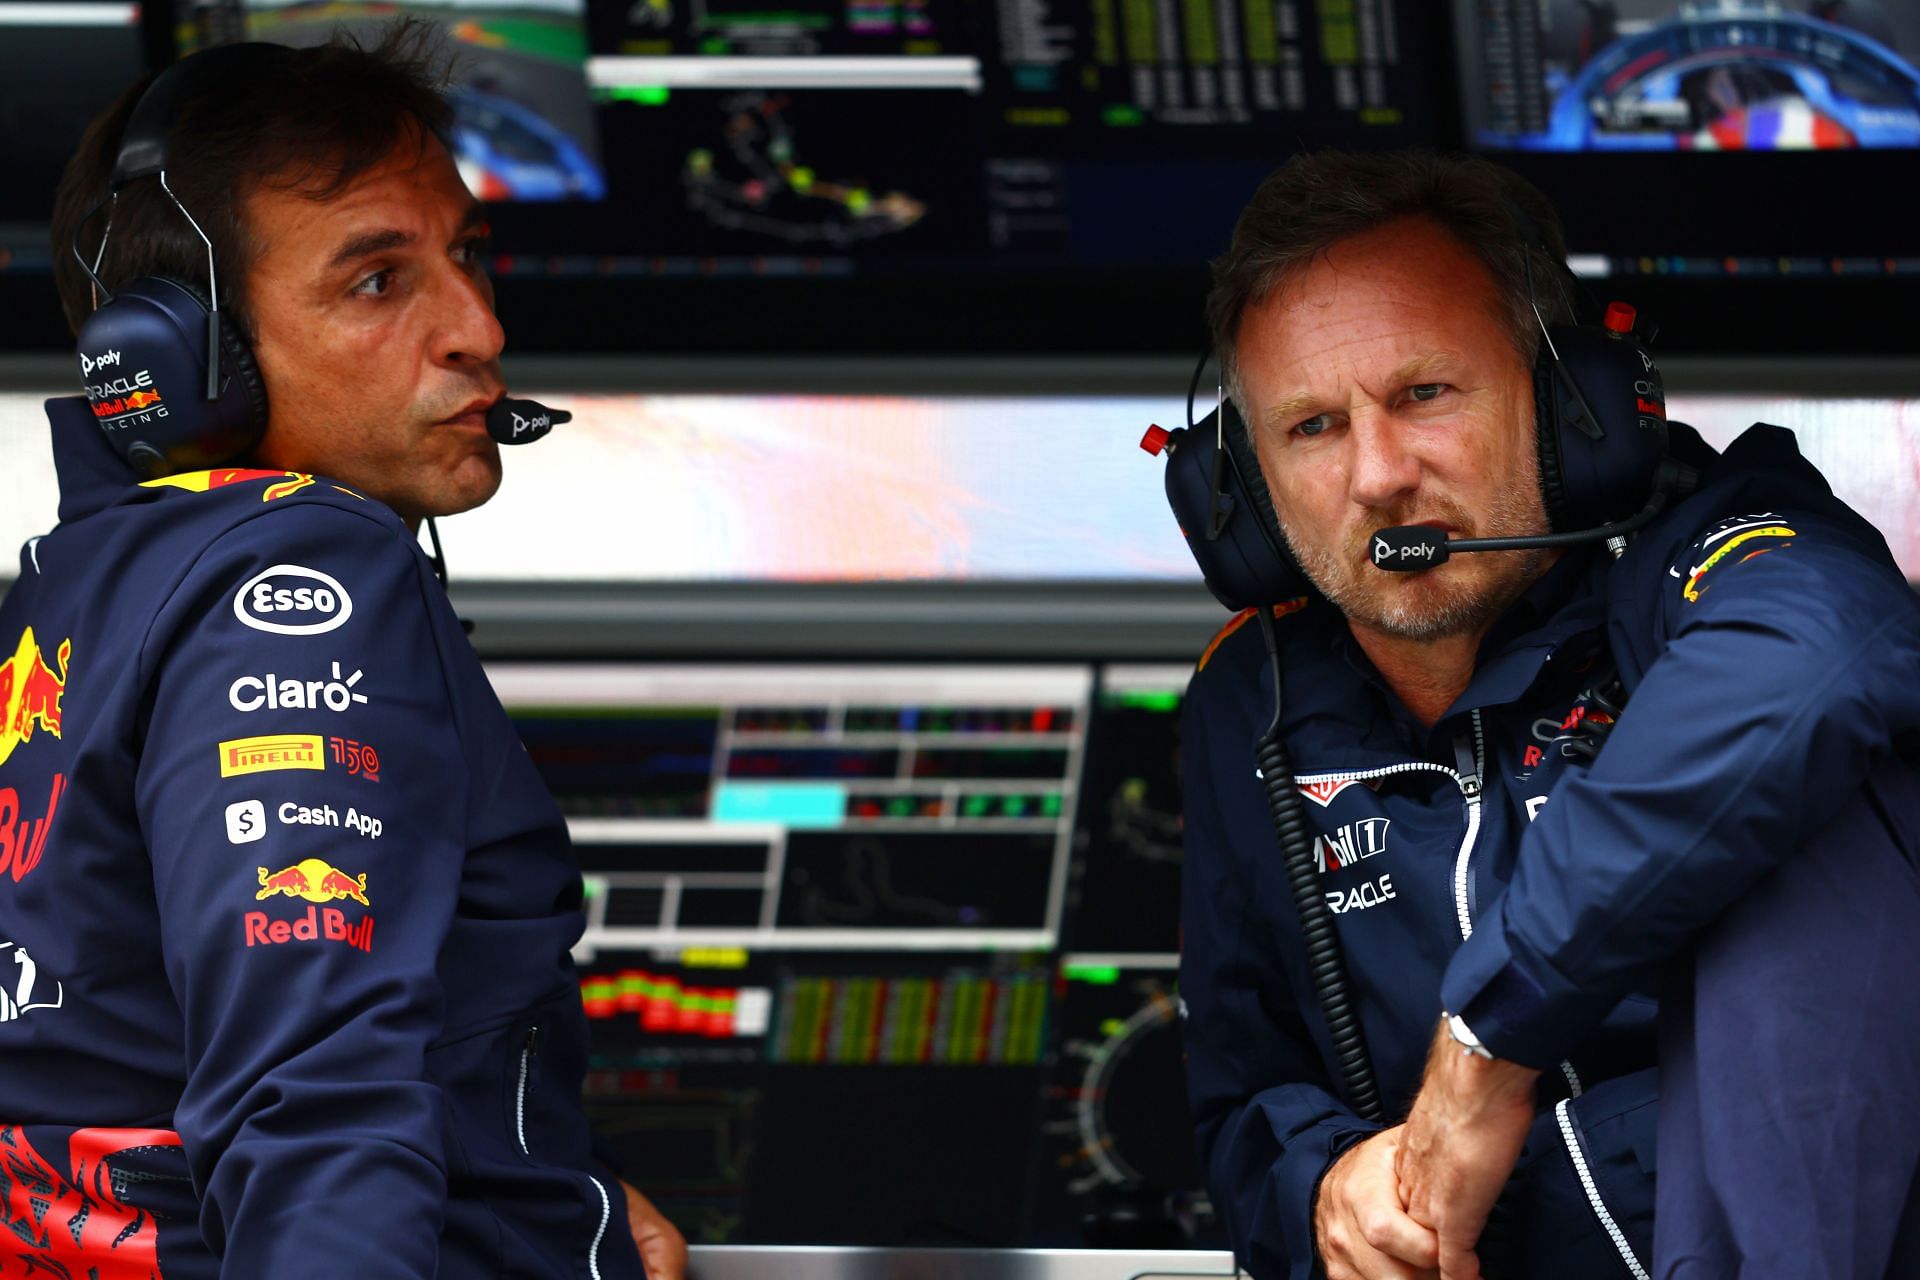 Pierre Wache, Chief Engineer of Performance Engineering Team Principal Christian Horner look on during practice (Photo by Mark Thompson/Getty Images)